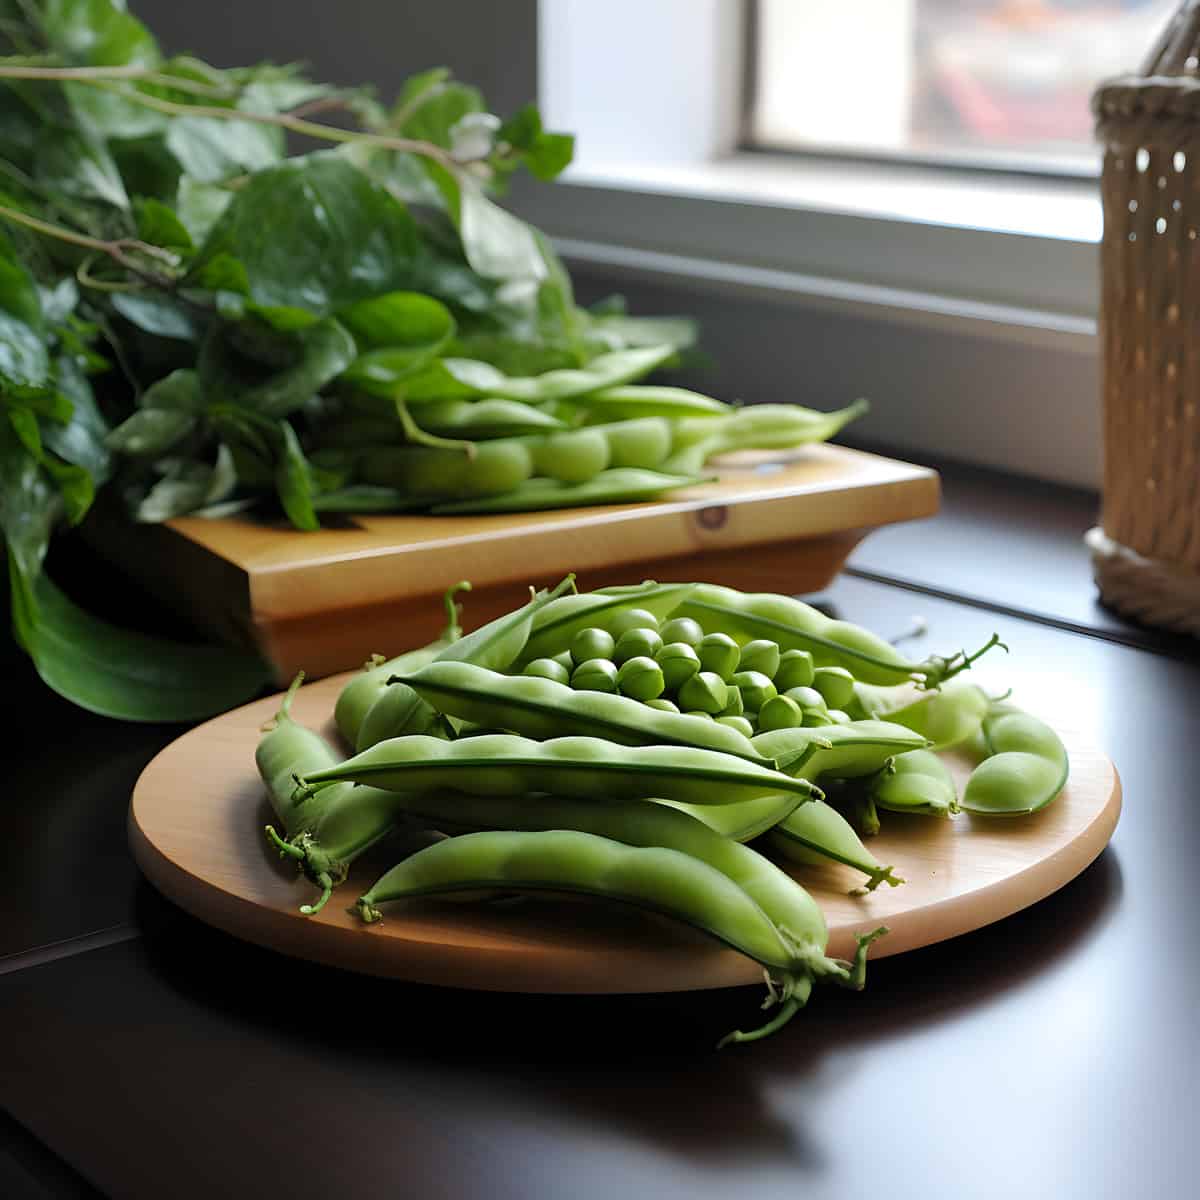 Arhar Peas on a kitchen counter